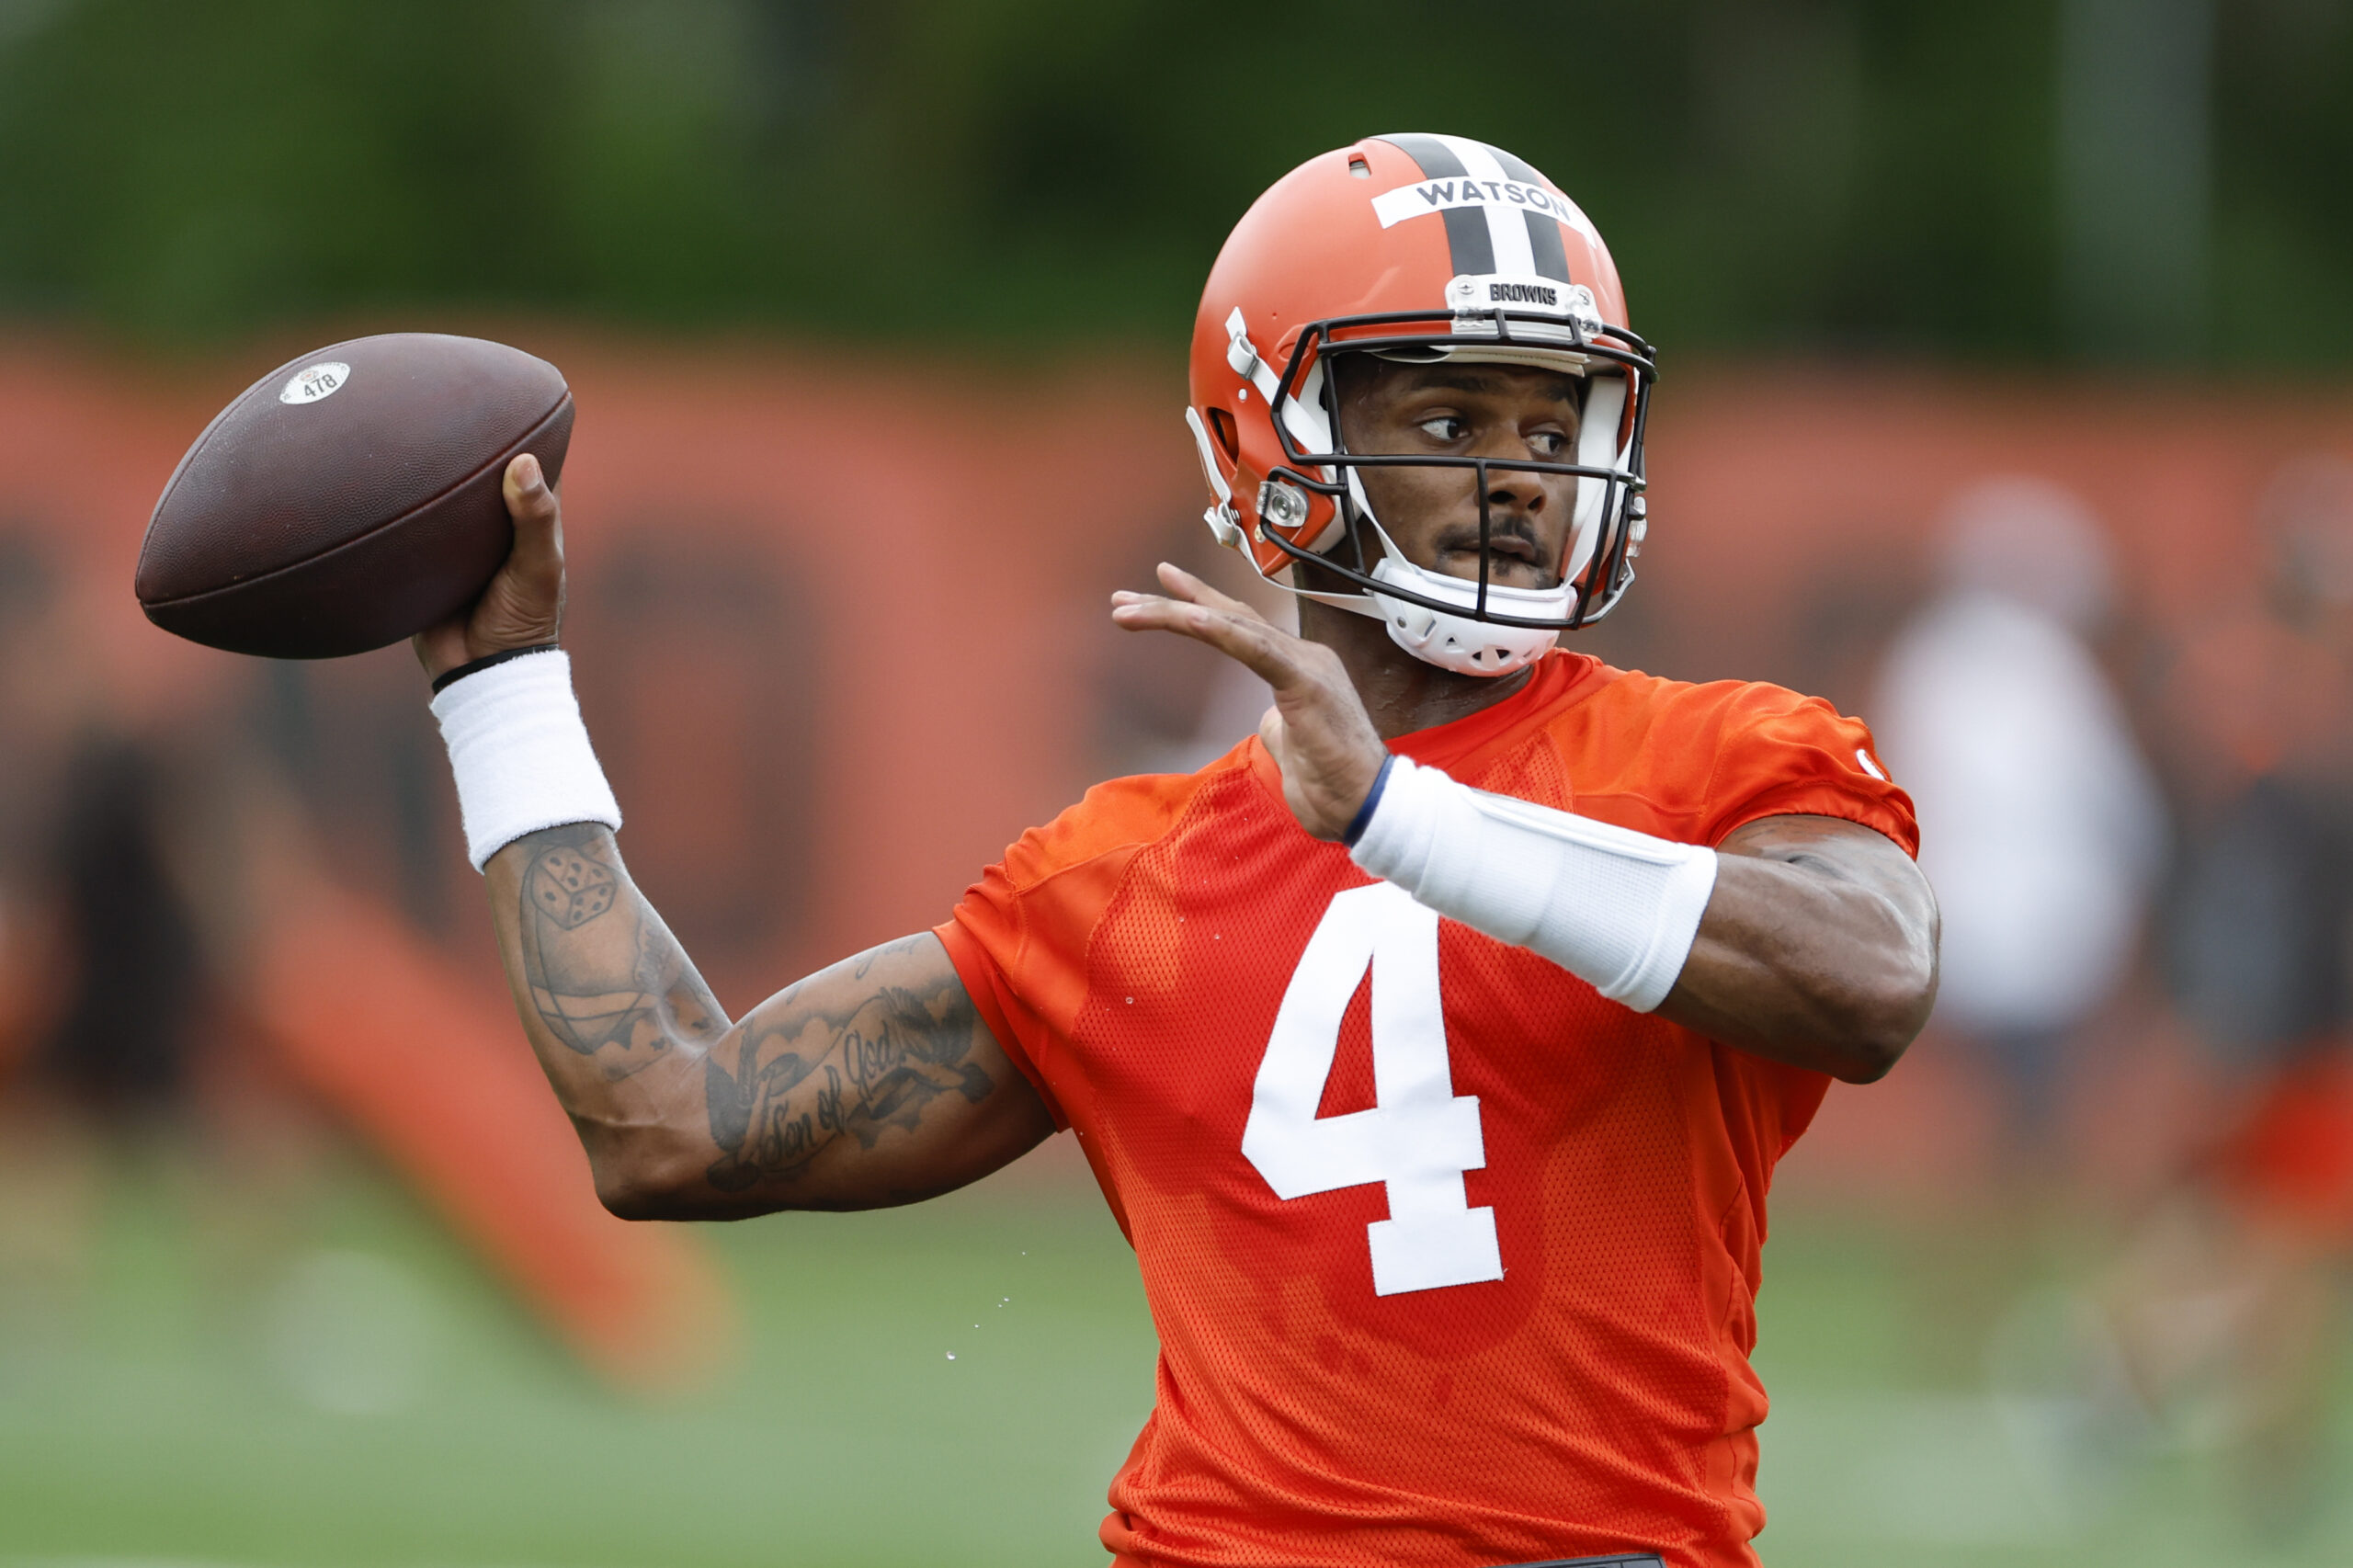 Cleveland Browns quarterback Deshaun Watson takes part in drills at the NFL football team's practice facility Tuesday, June 14, 2022, in Berea, Ohio. (AP Photo/Ron Schwane)